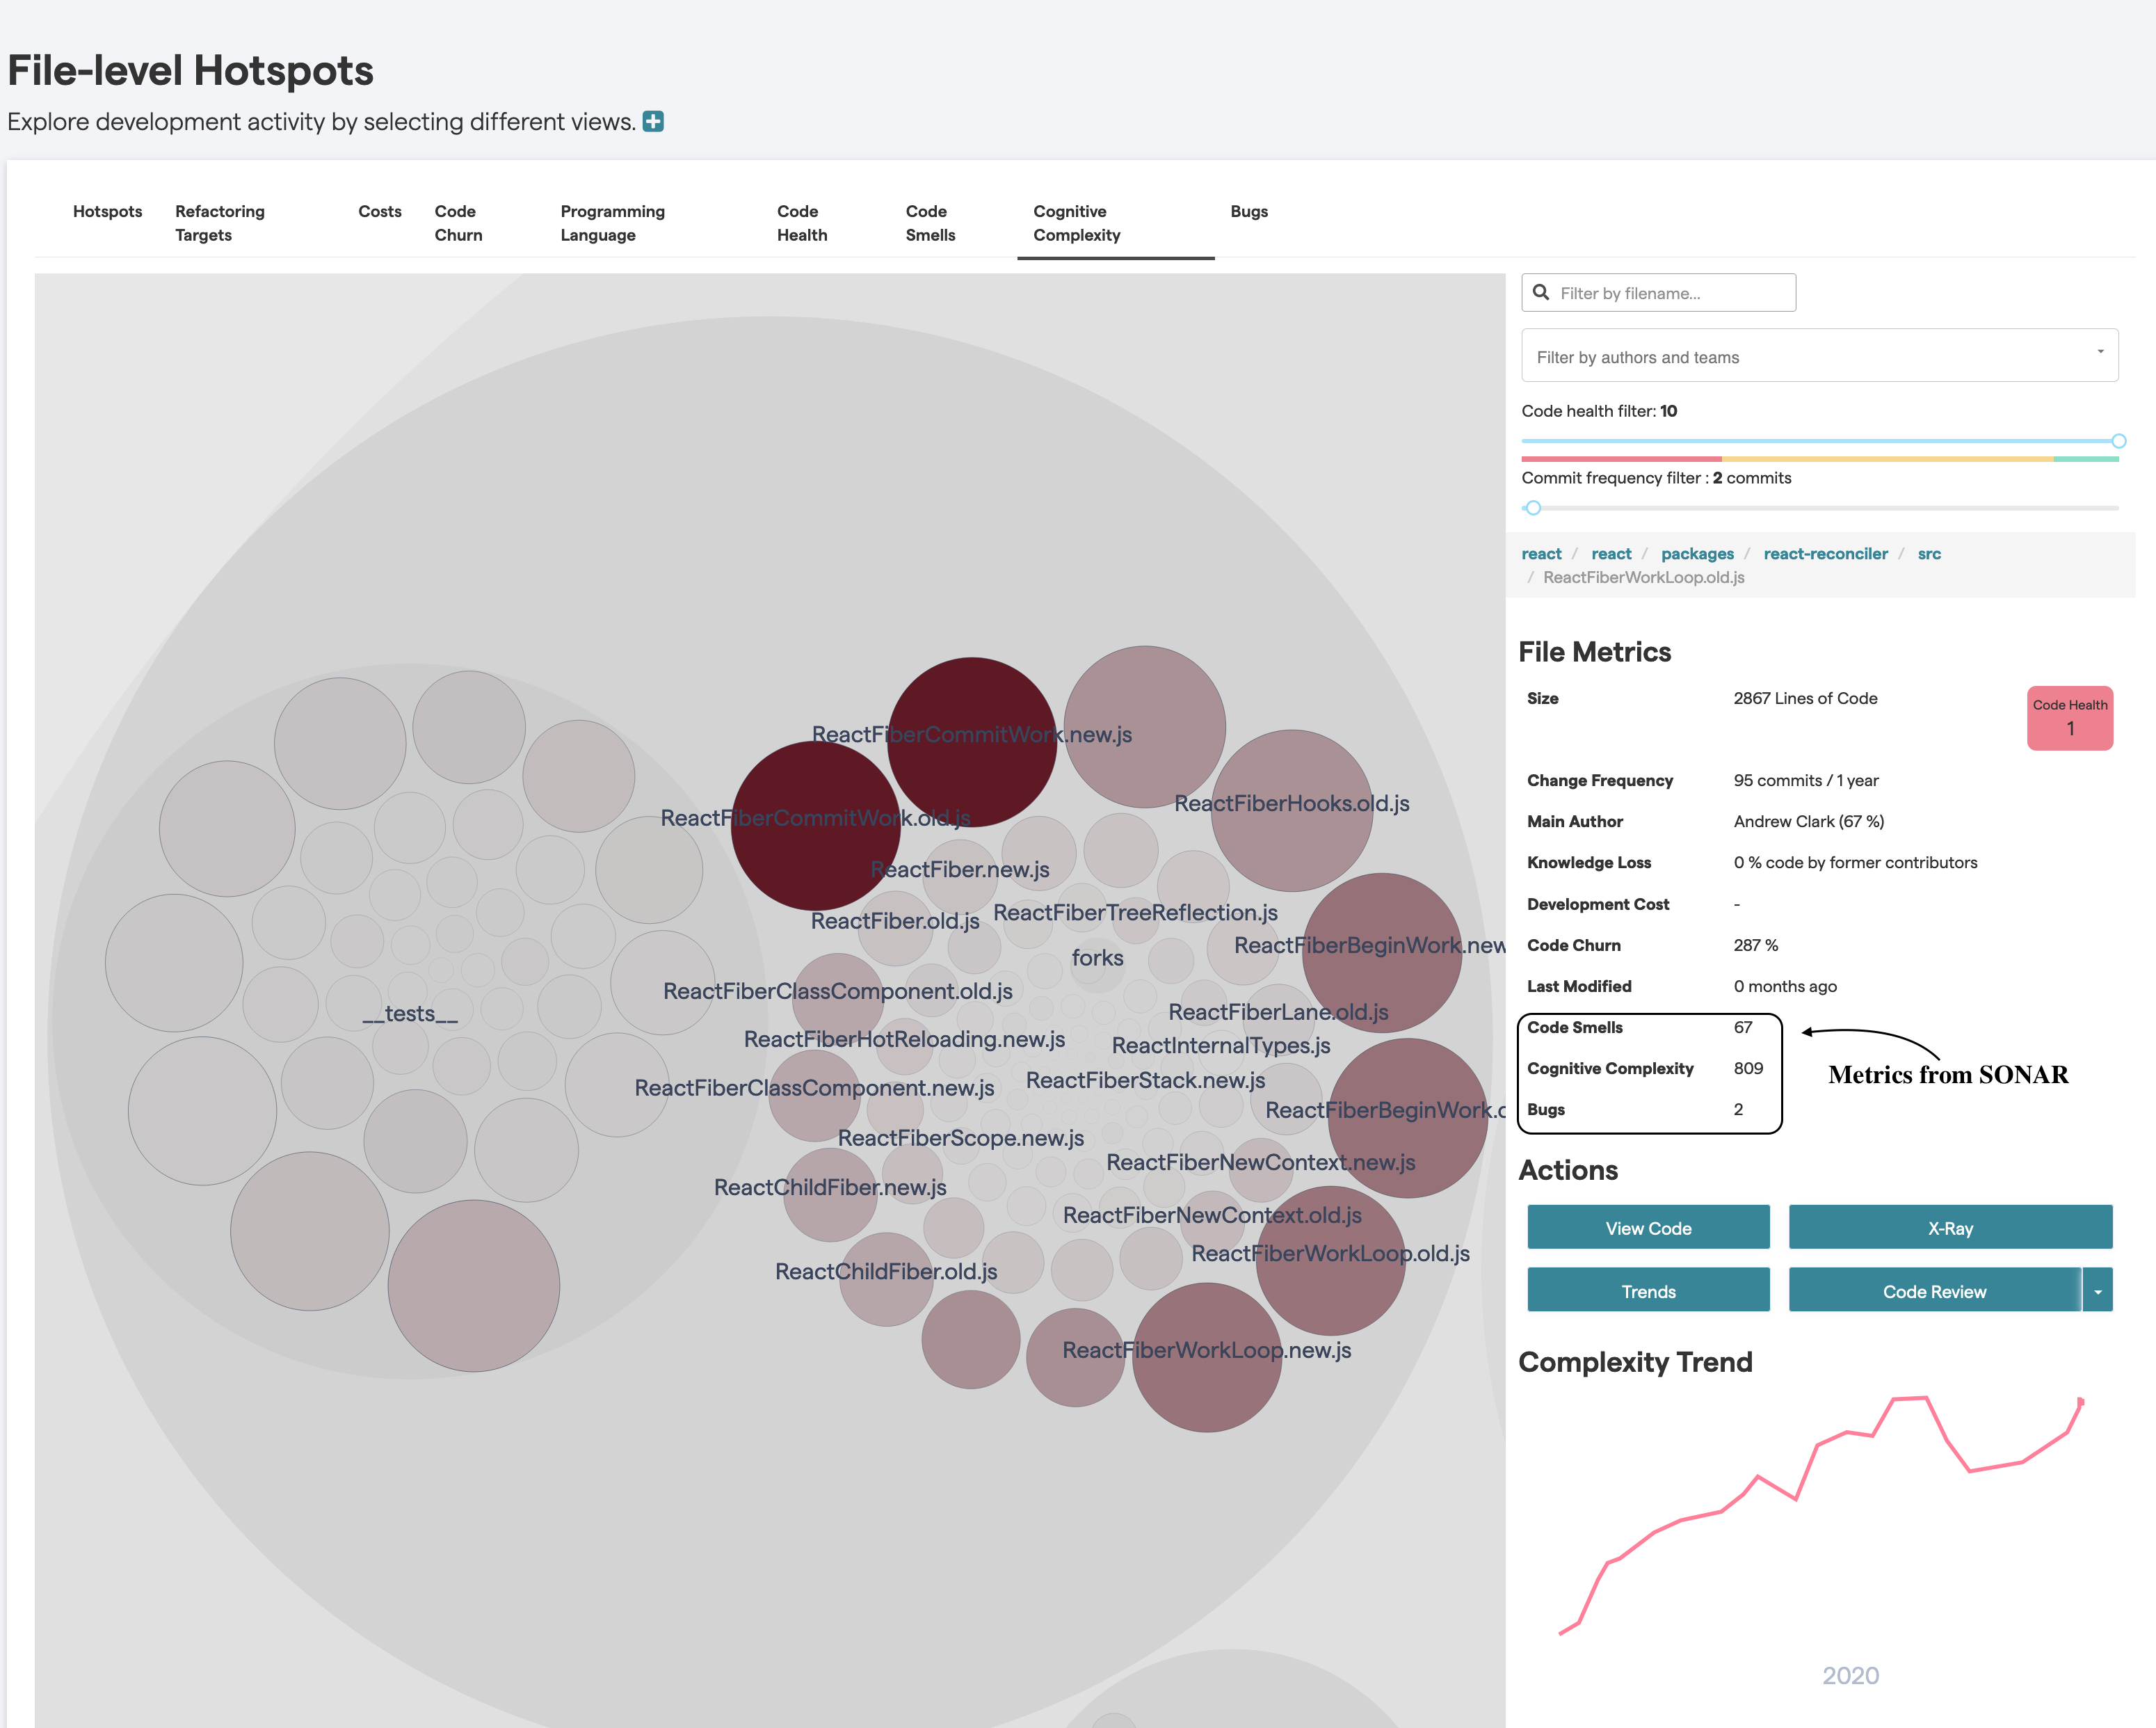 CodeScene integrates SonarQube metrics in its interactive views. Here's an example of visualizing Cognitive Complexity.